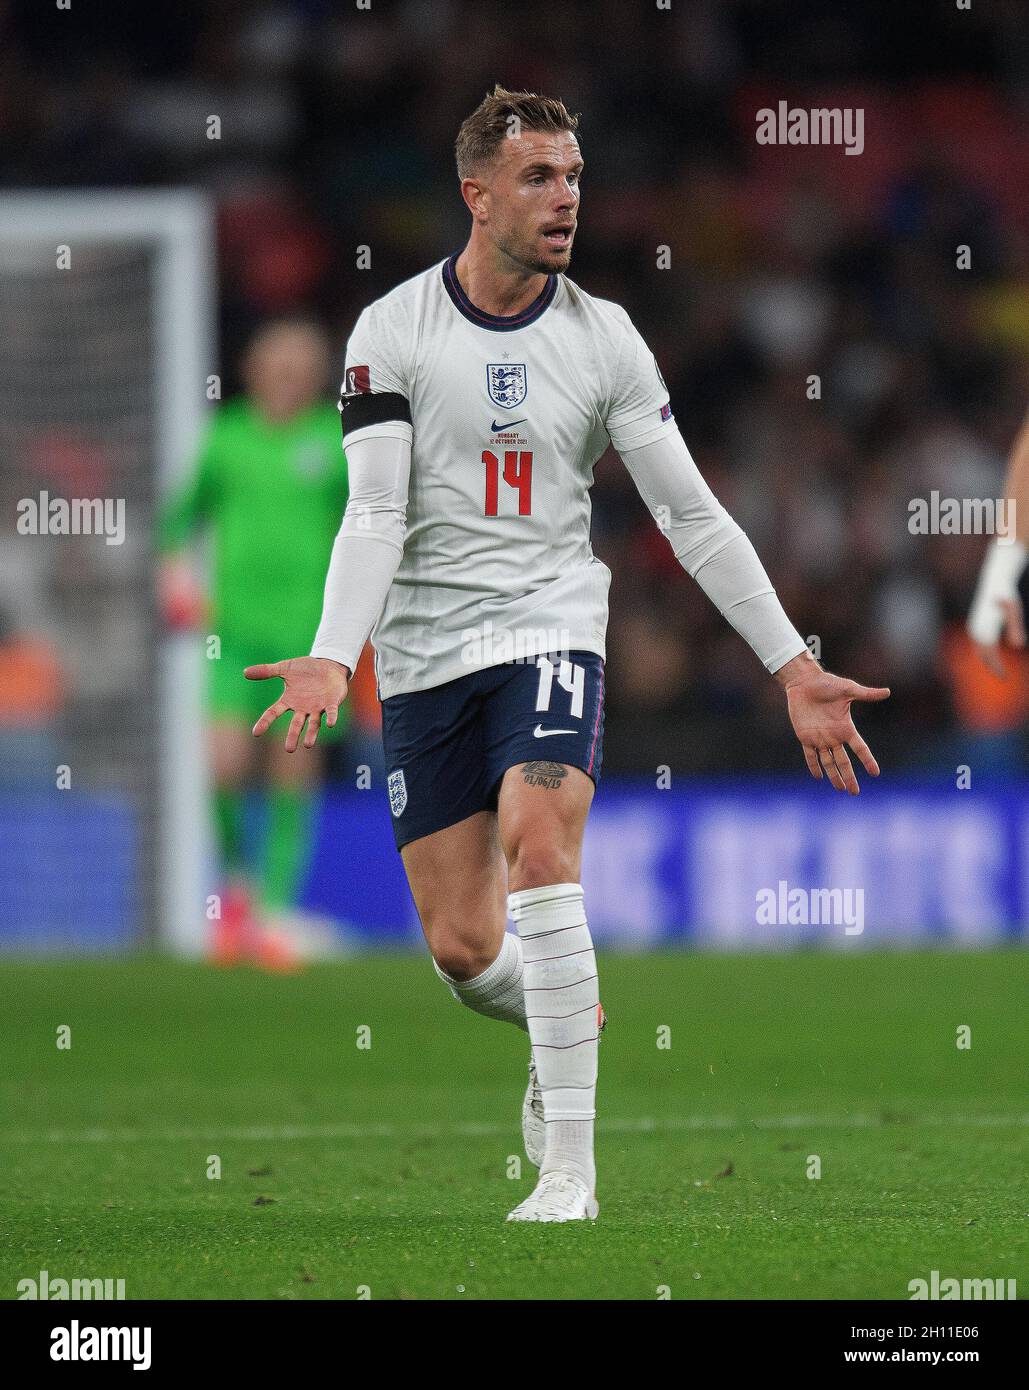 England v Hungary - FIFA World Cup 2022 - Wembley Stadium  England's Jordan Henderson during the World Cup Qualifier at Wembley. Picture : Mark Pain Stock Photo